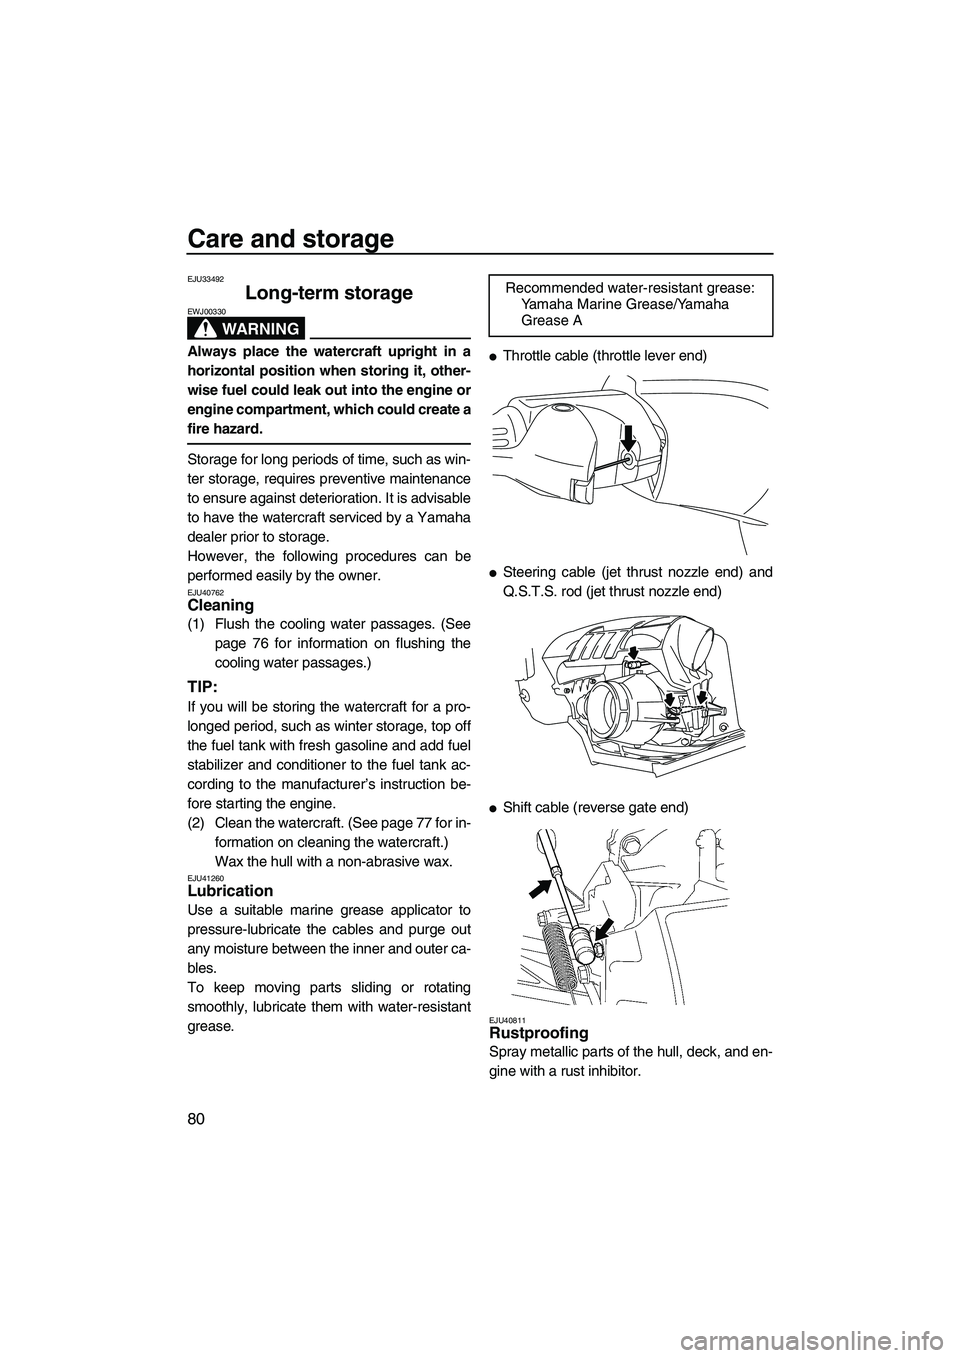 YAMAHA FZR 2012 Owners Guide Care and storage
80
EJU33492
Long-term storage 
WARNING
EWJ00330
Always place the watercraft upright in a
horizontal position when storing it, other-
wise fuel could leak out into the engine or
engine